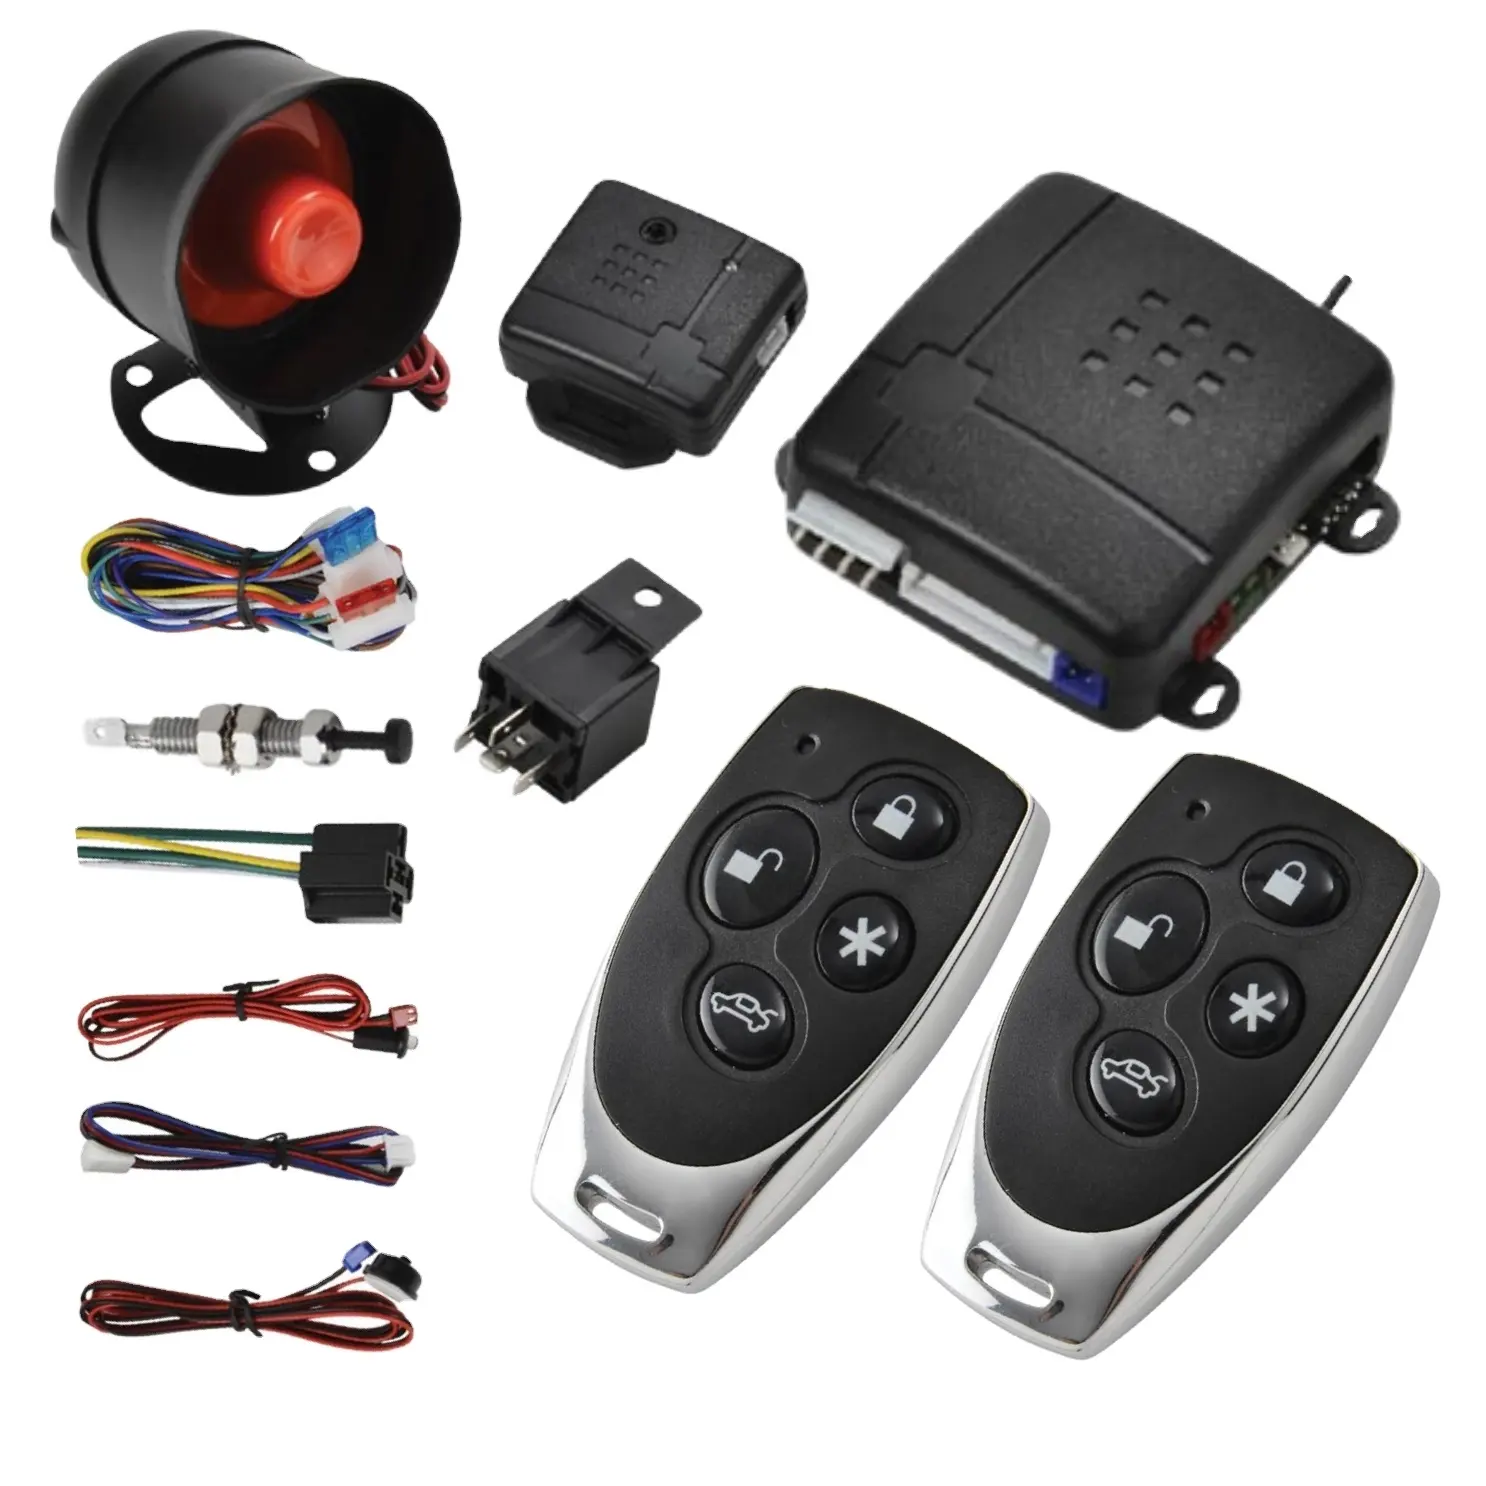 Hot Sale Product Wireless Car Alarm Car Alarms Remote Control Transmitter